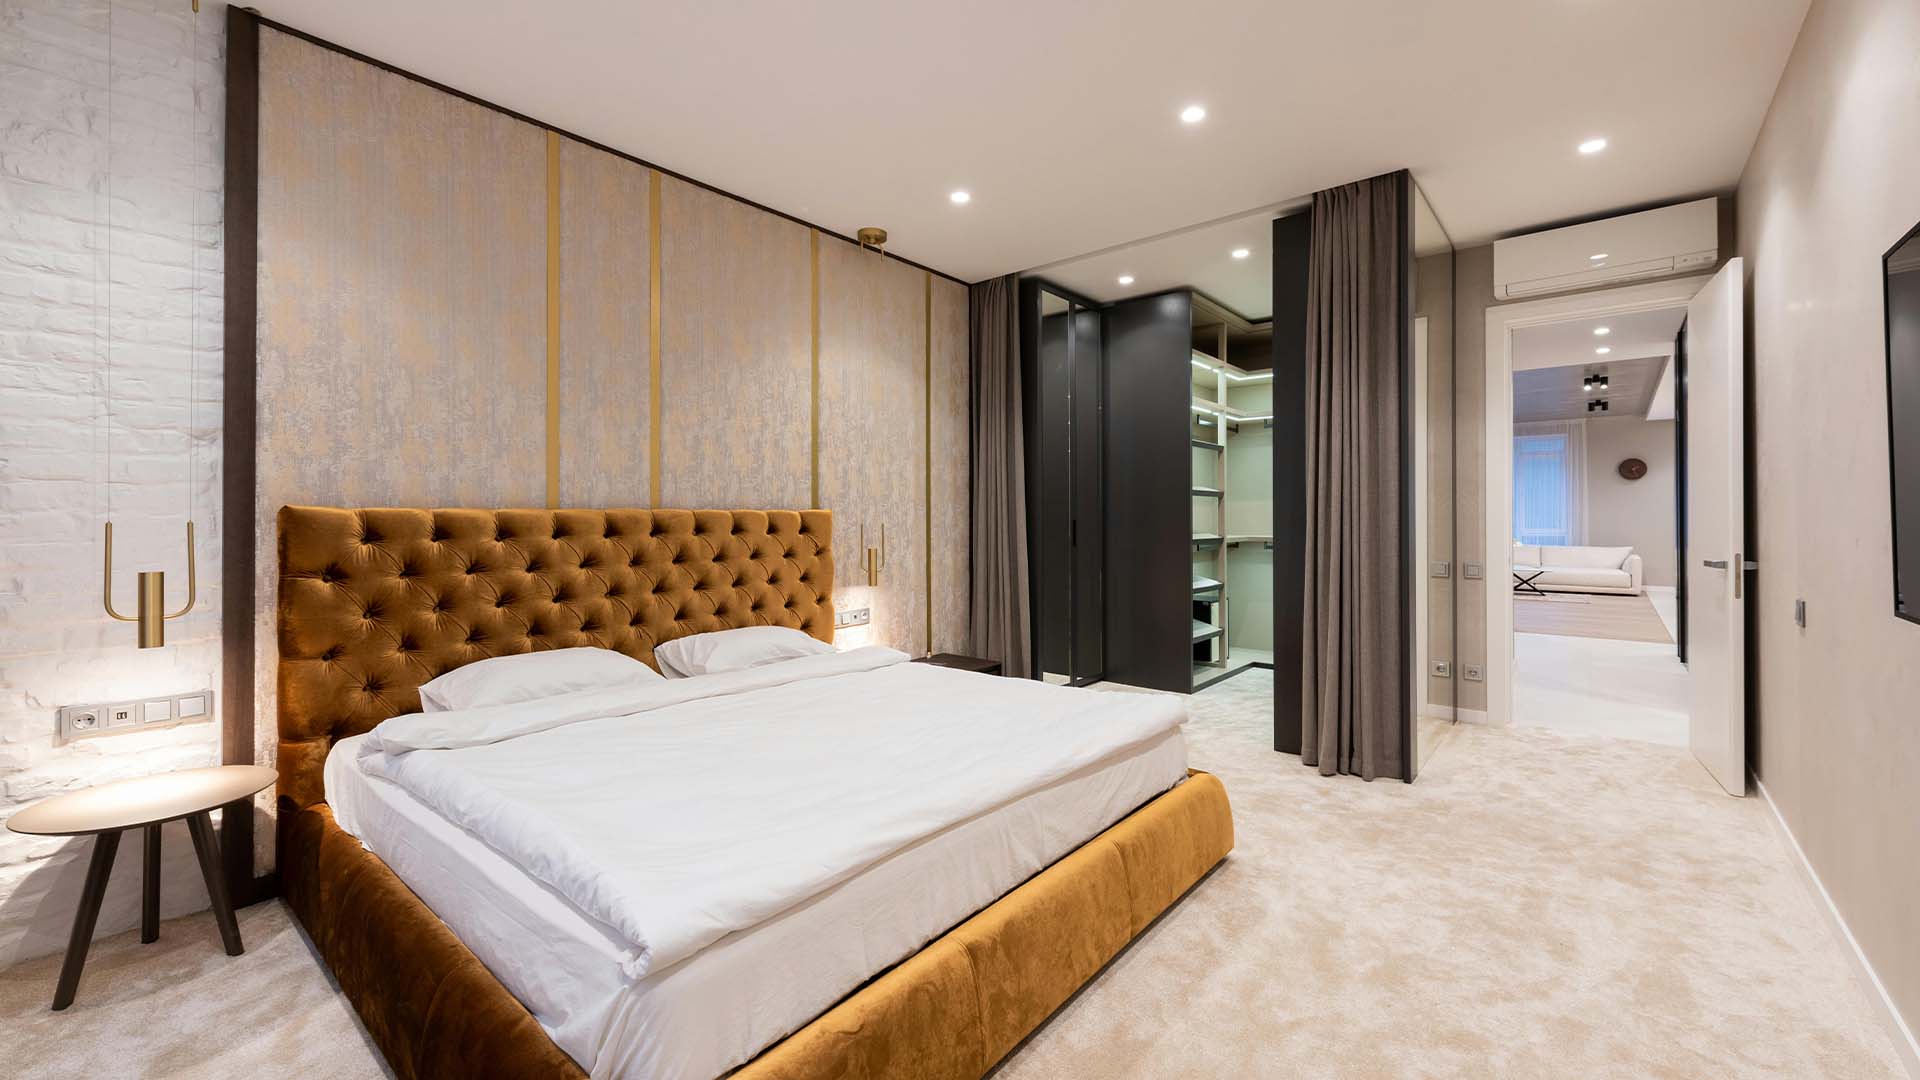 Modern bedroom interior with a custom-made closet beside the bed